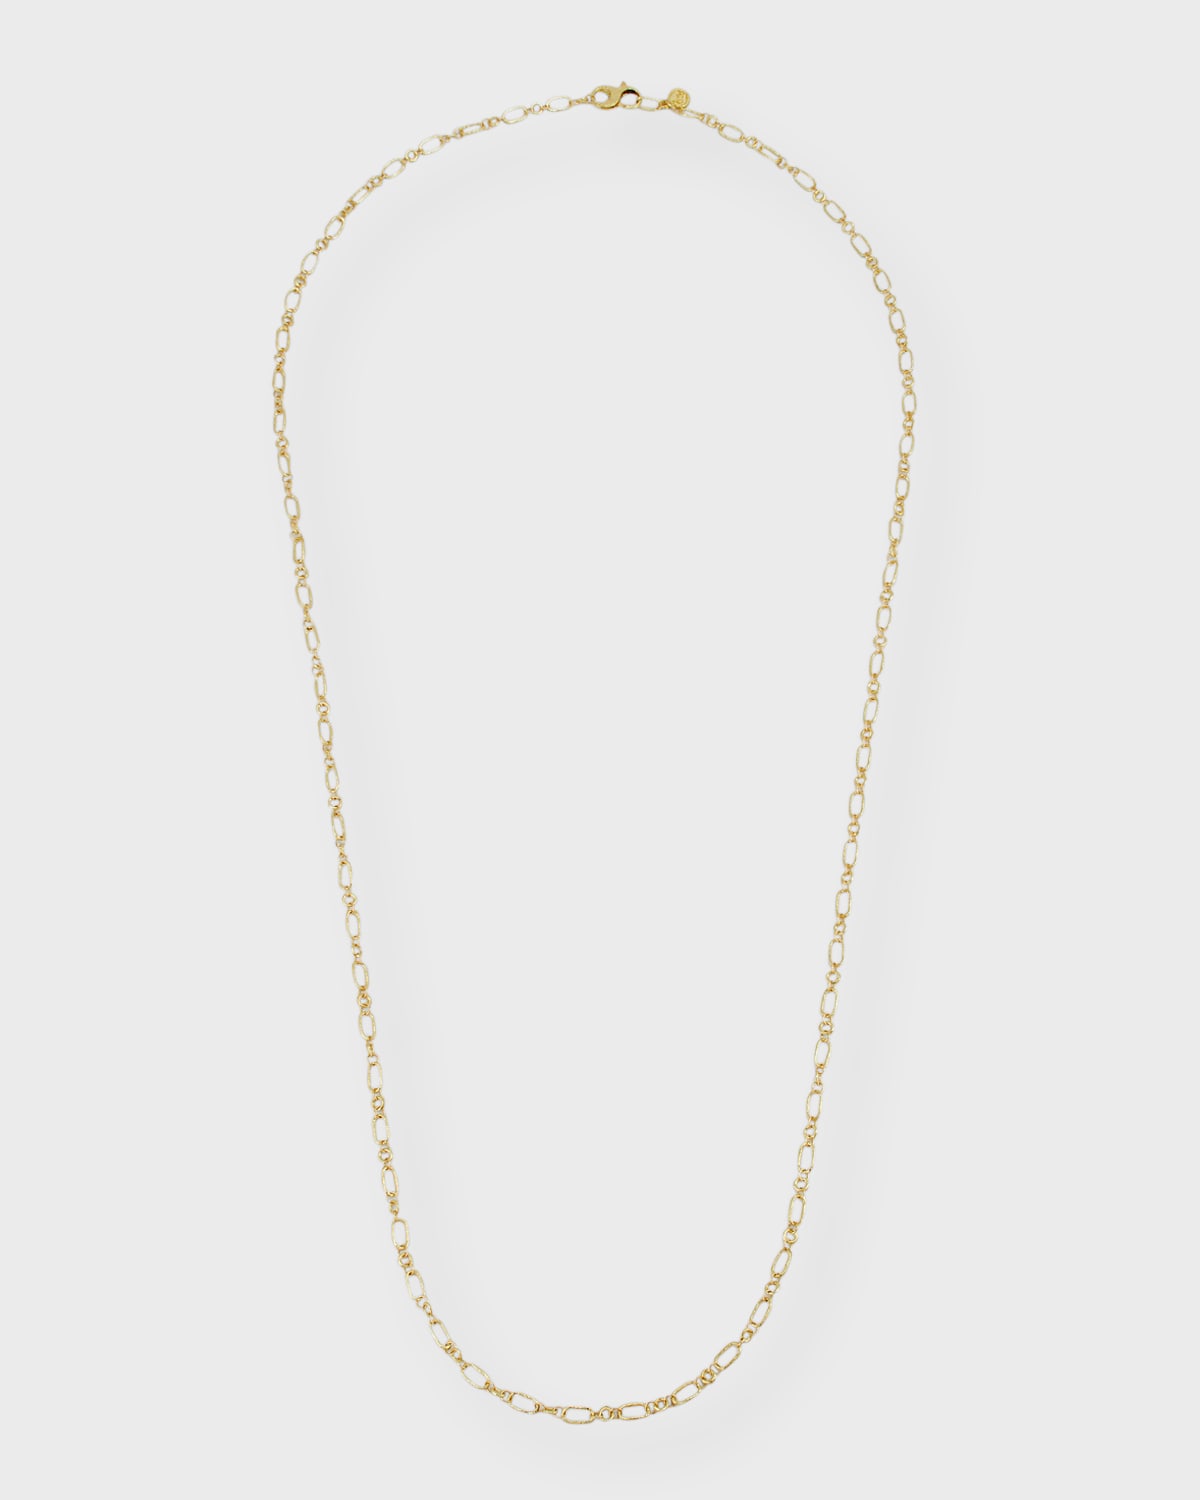 18K Yellow Gold Petite Paperclip Chain Necklace, 42"